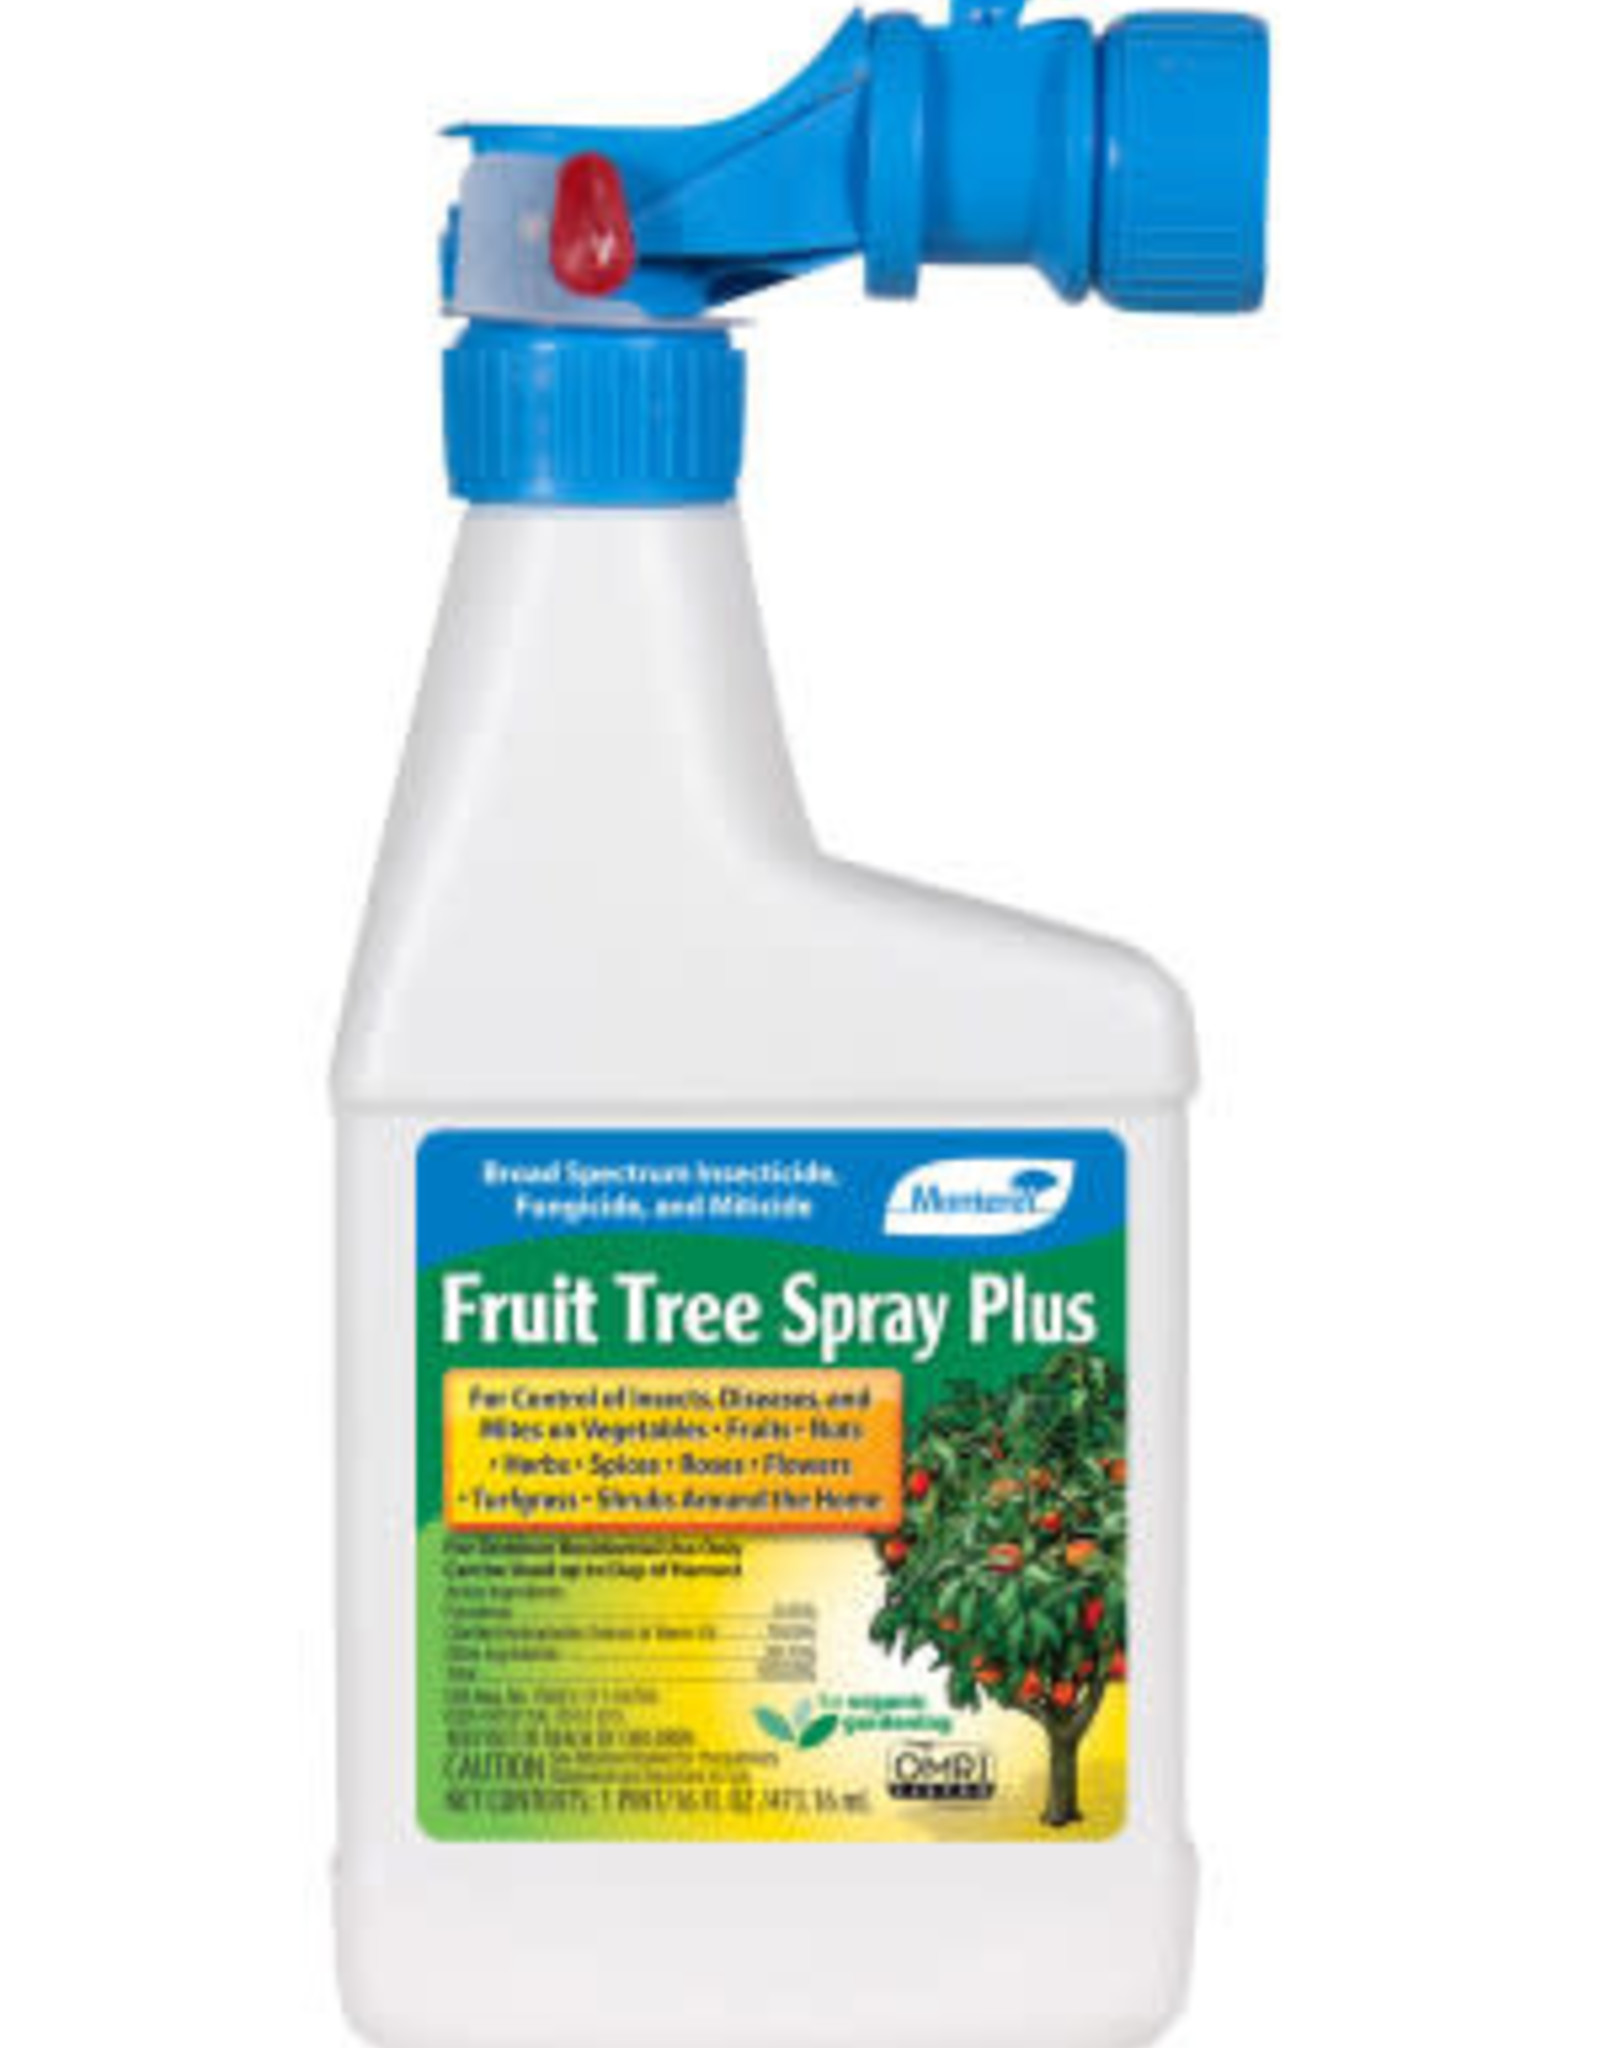 Monterey Fruit Tree Spray Insecticide Fungicide Miticide RTS Organic 16oz